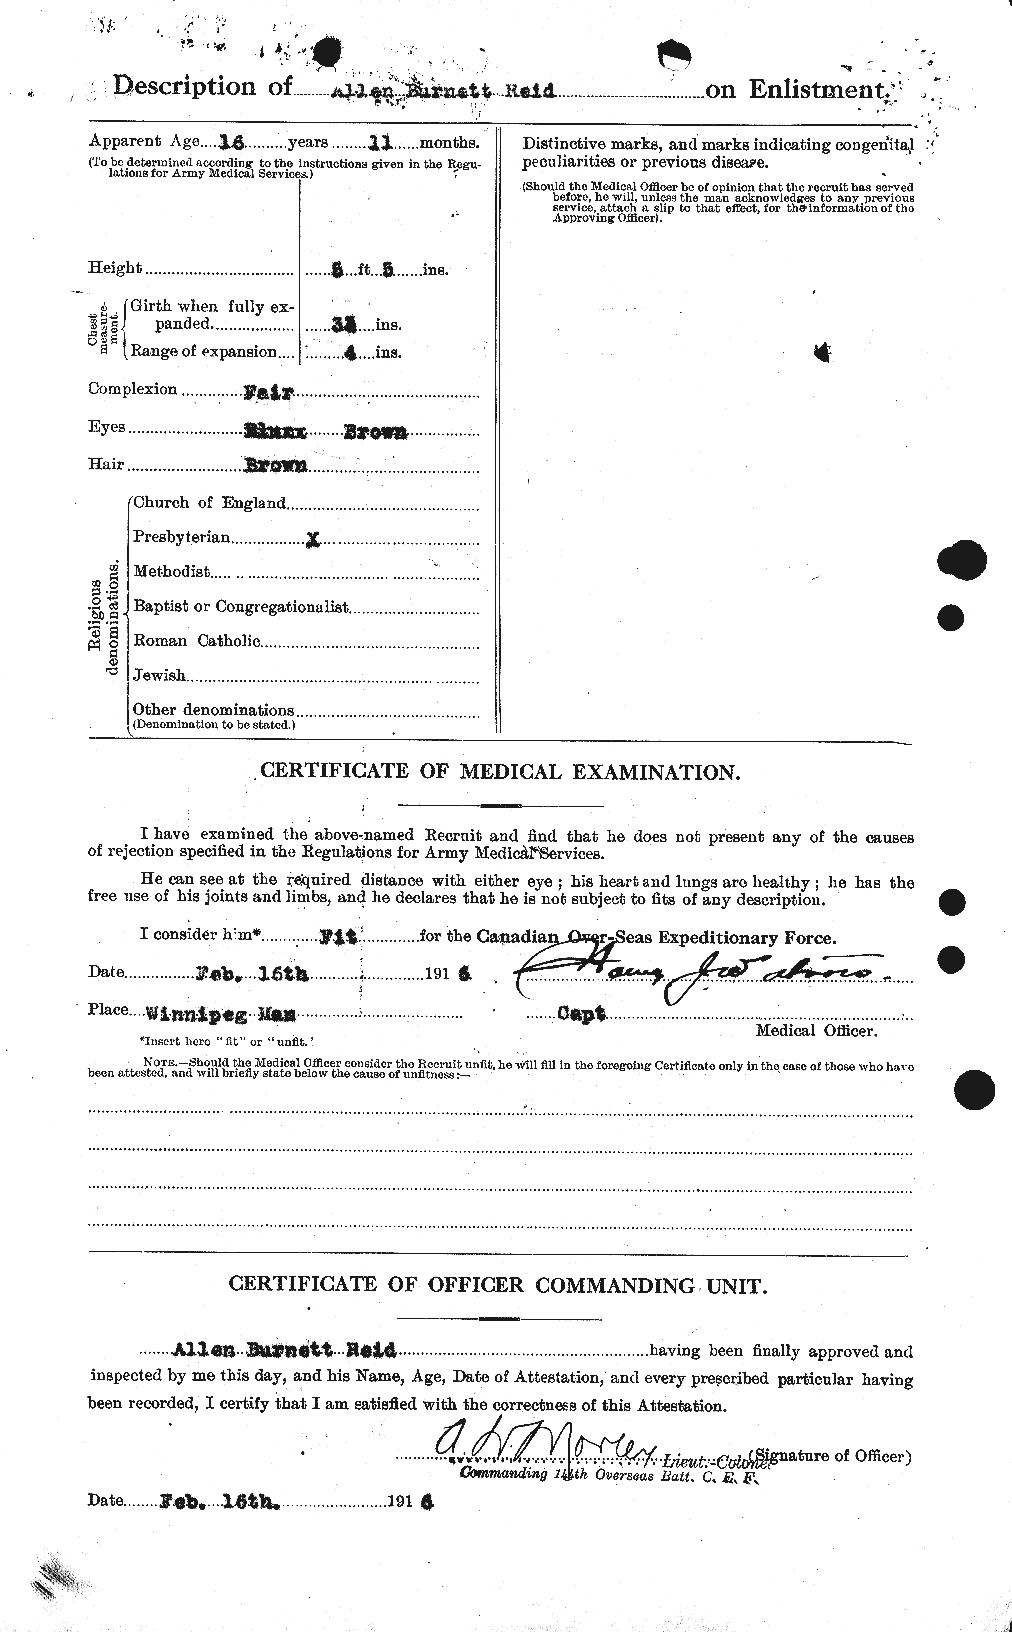 Personnel Records of the First World War - CEF 597803b